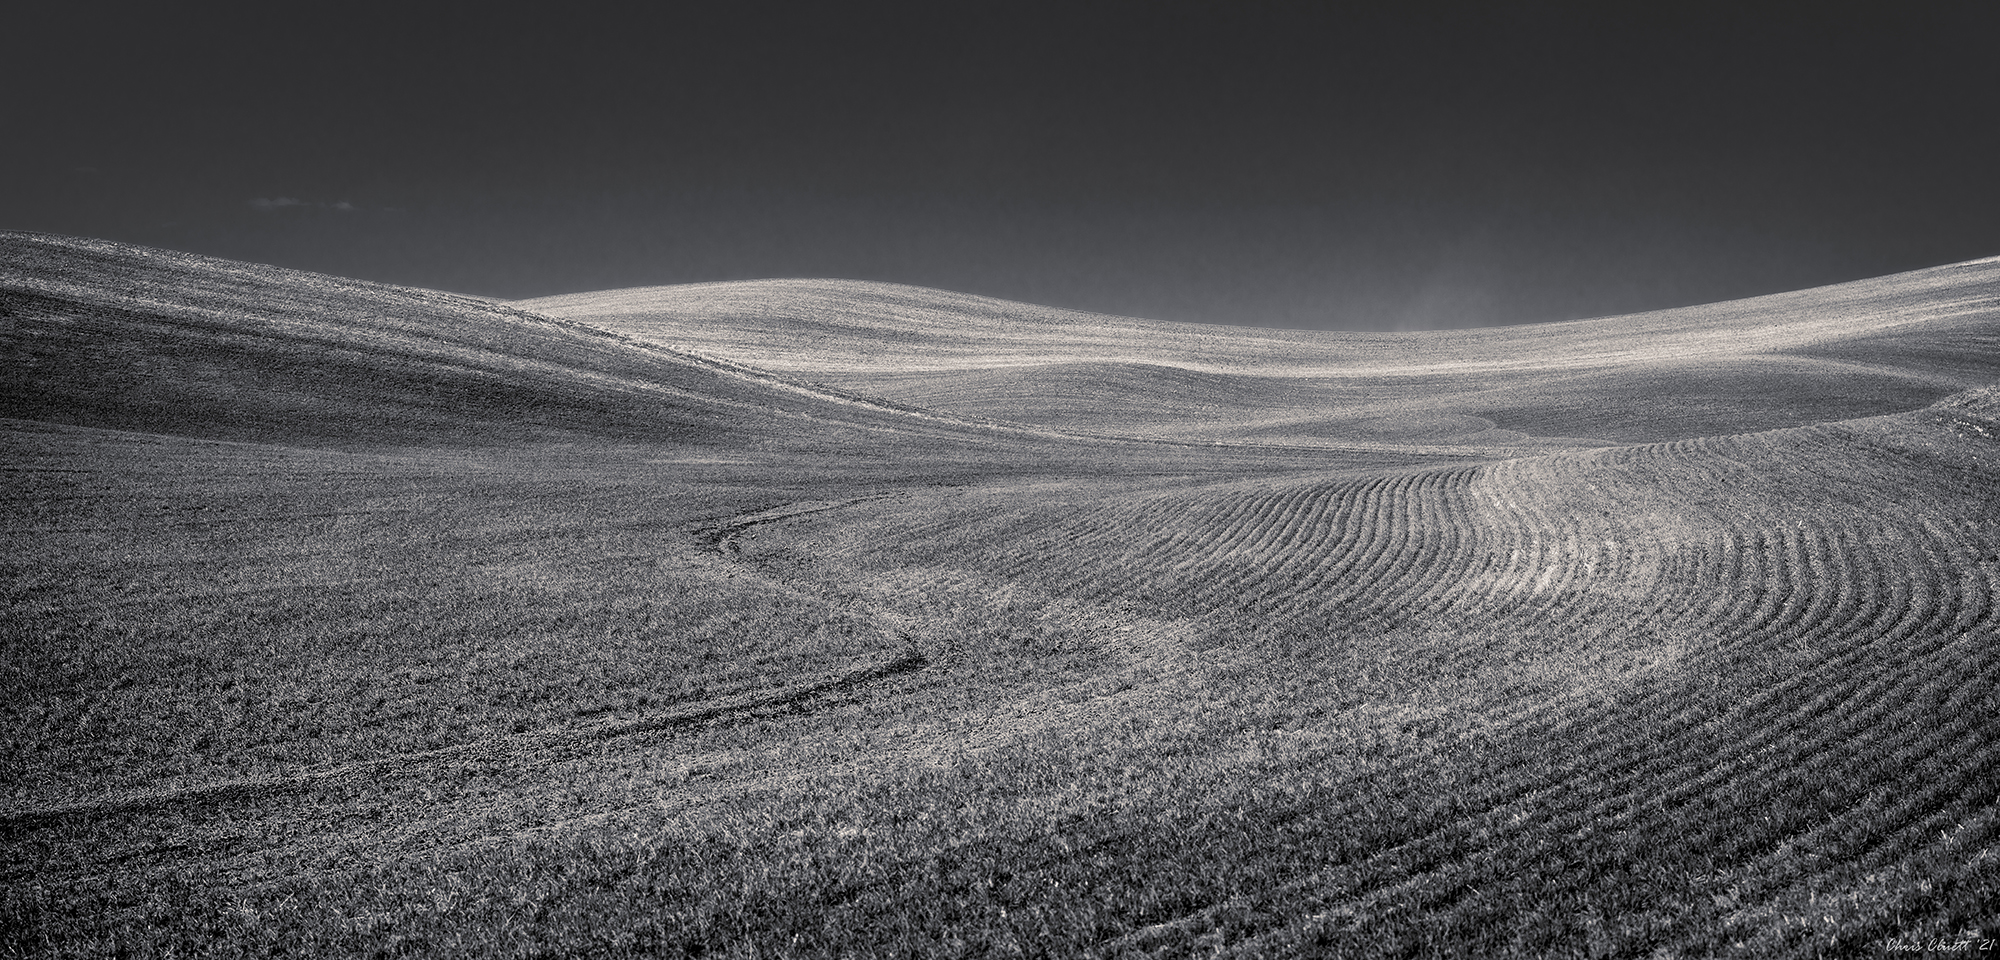 Precise and artful plowing patterns are drawn in the soil.